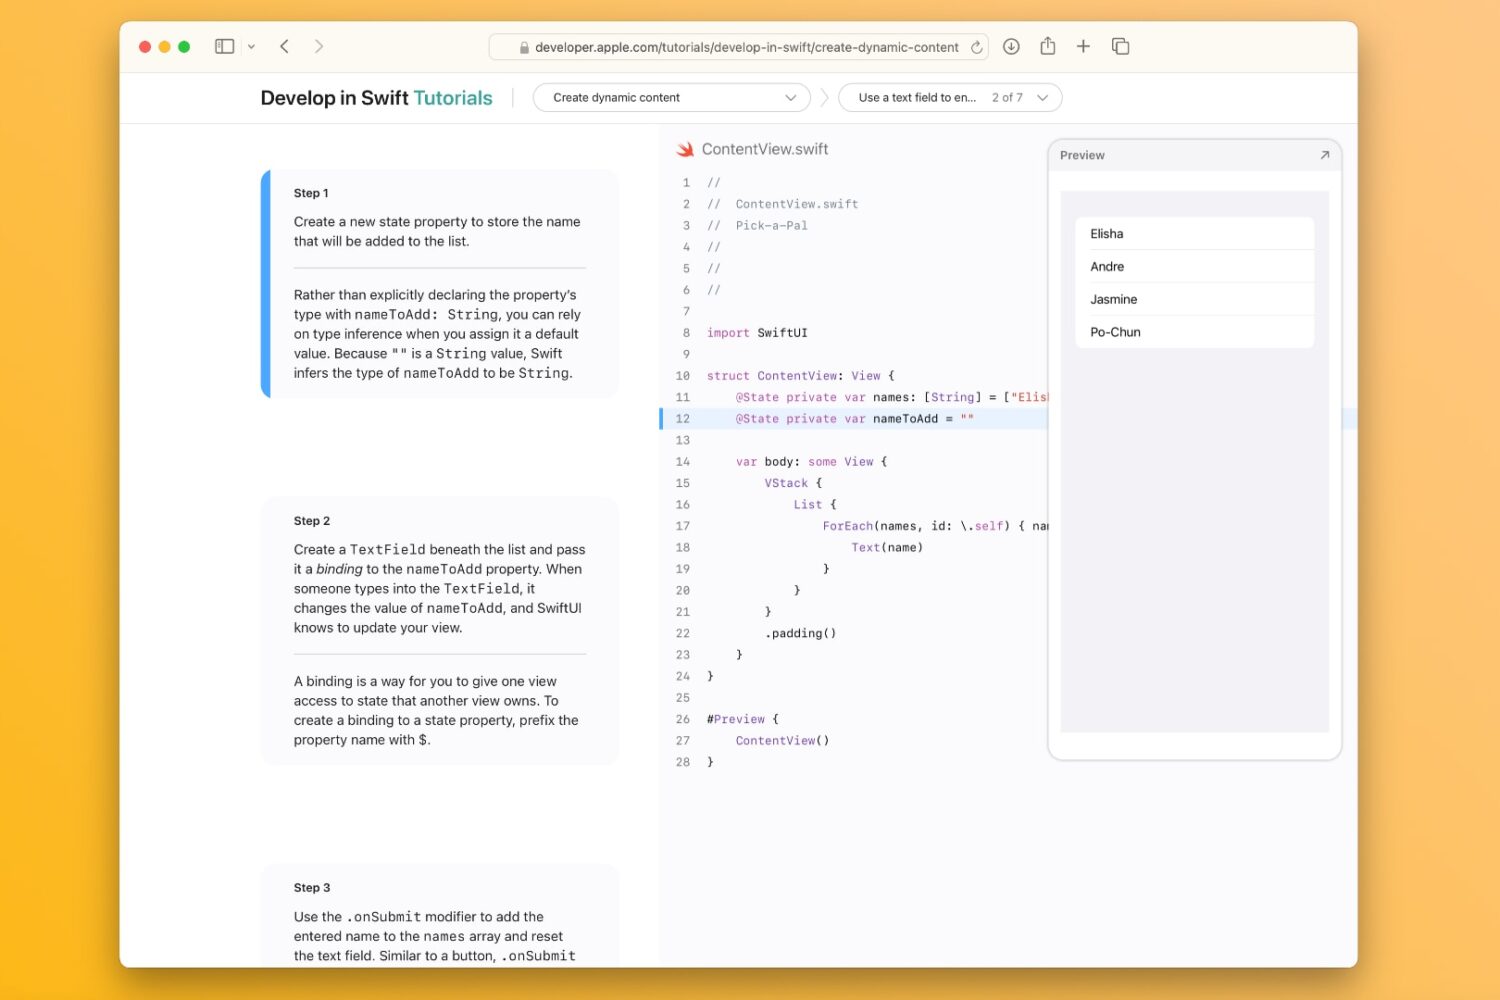 Safari screenshot of Apple's Develop in Swift Tutorials page with some code examples